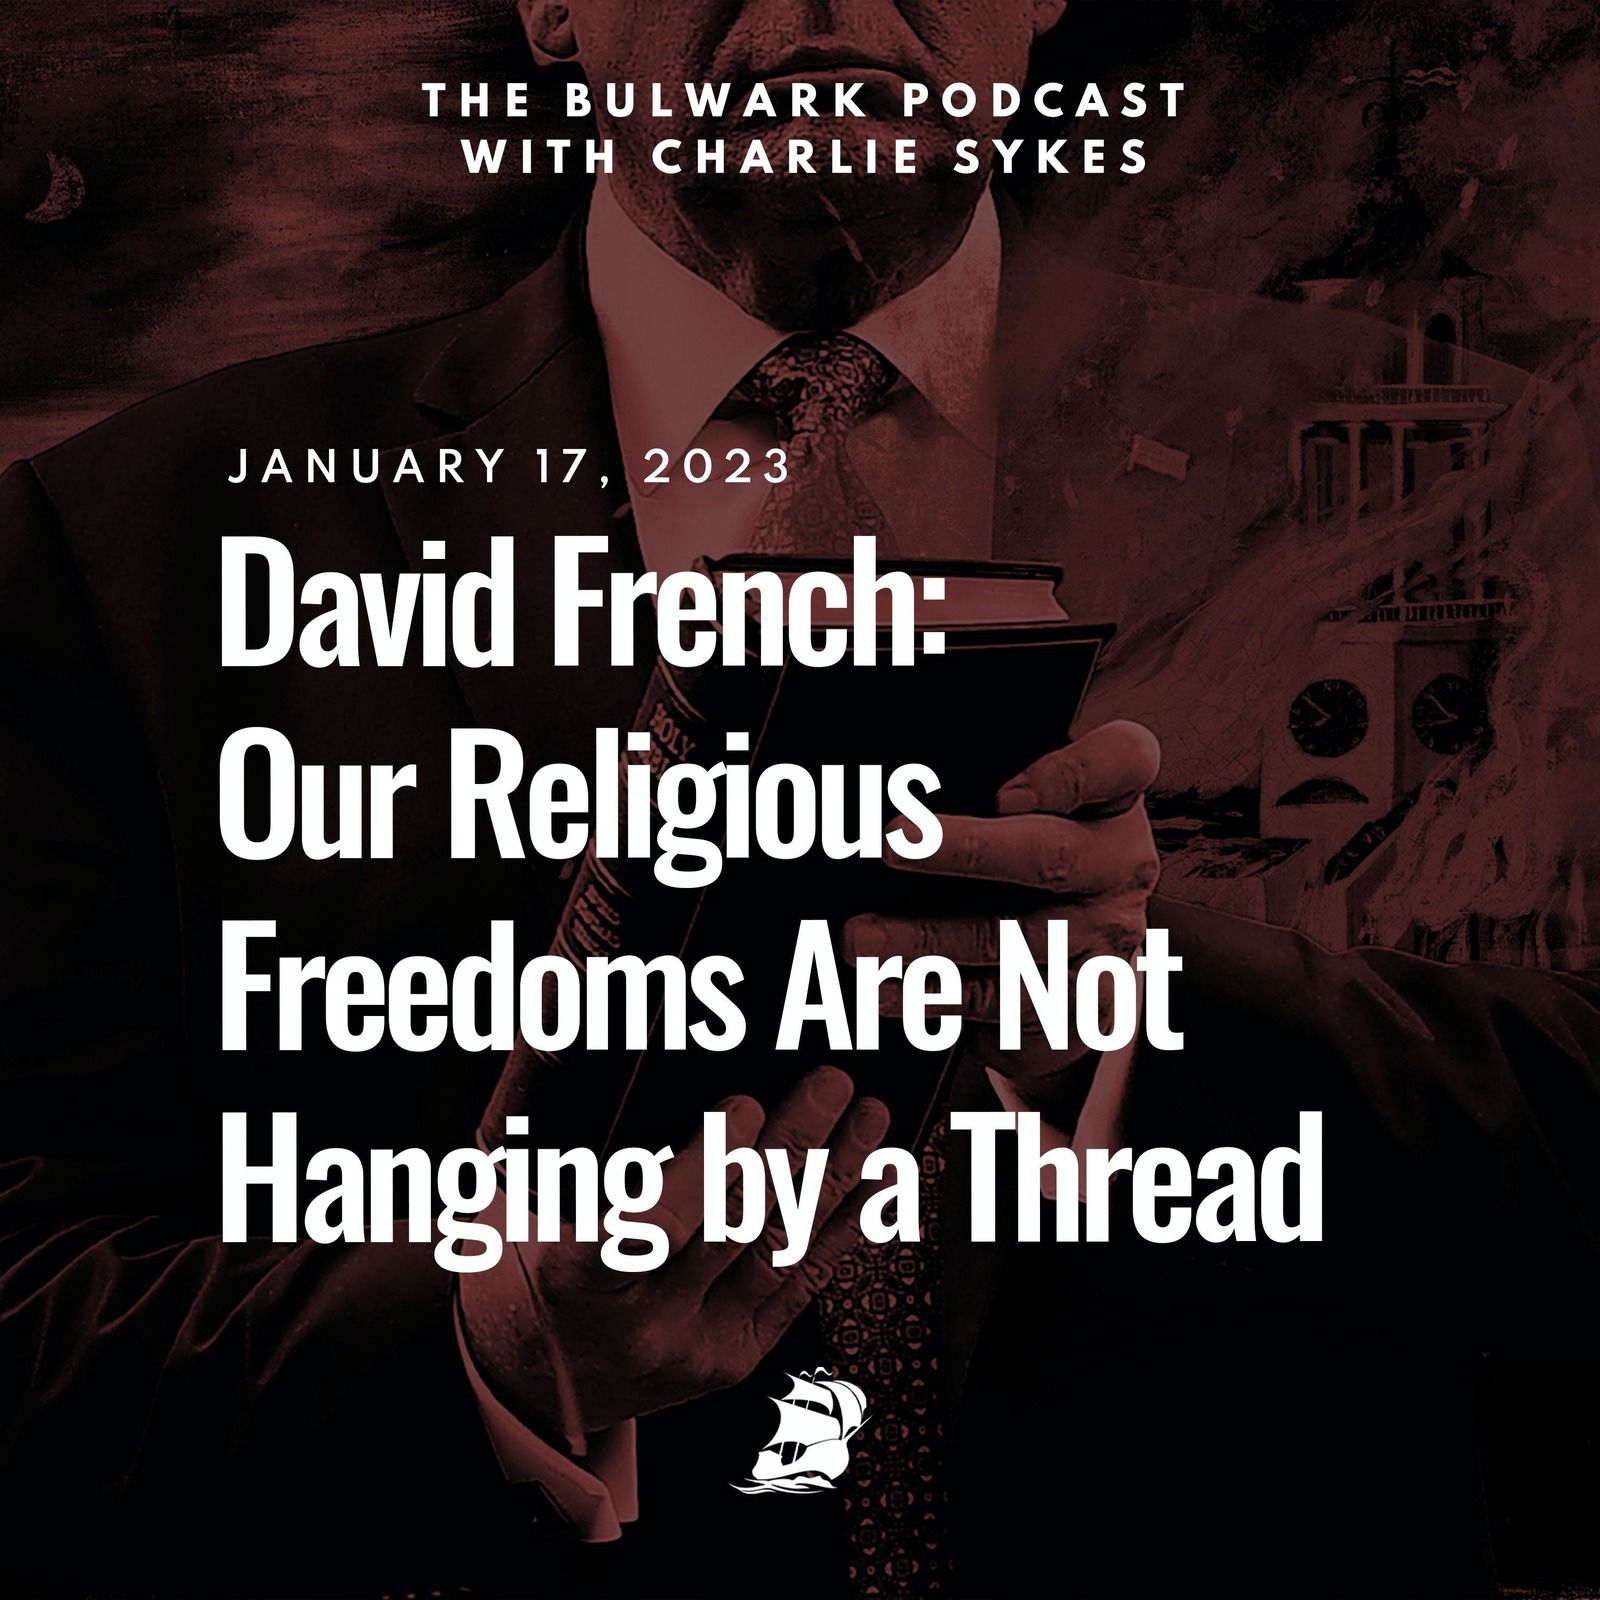 David French: Our Religious Freedoms Are Not Hanging by a Thread by The Bulwark Podcast